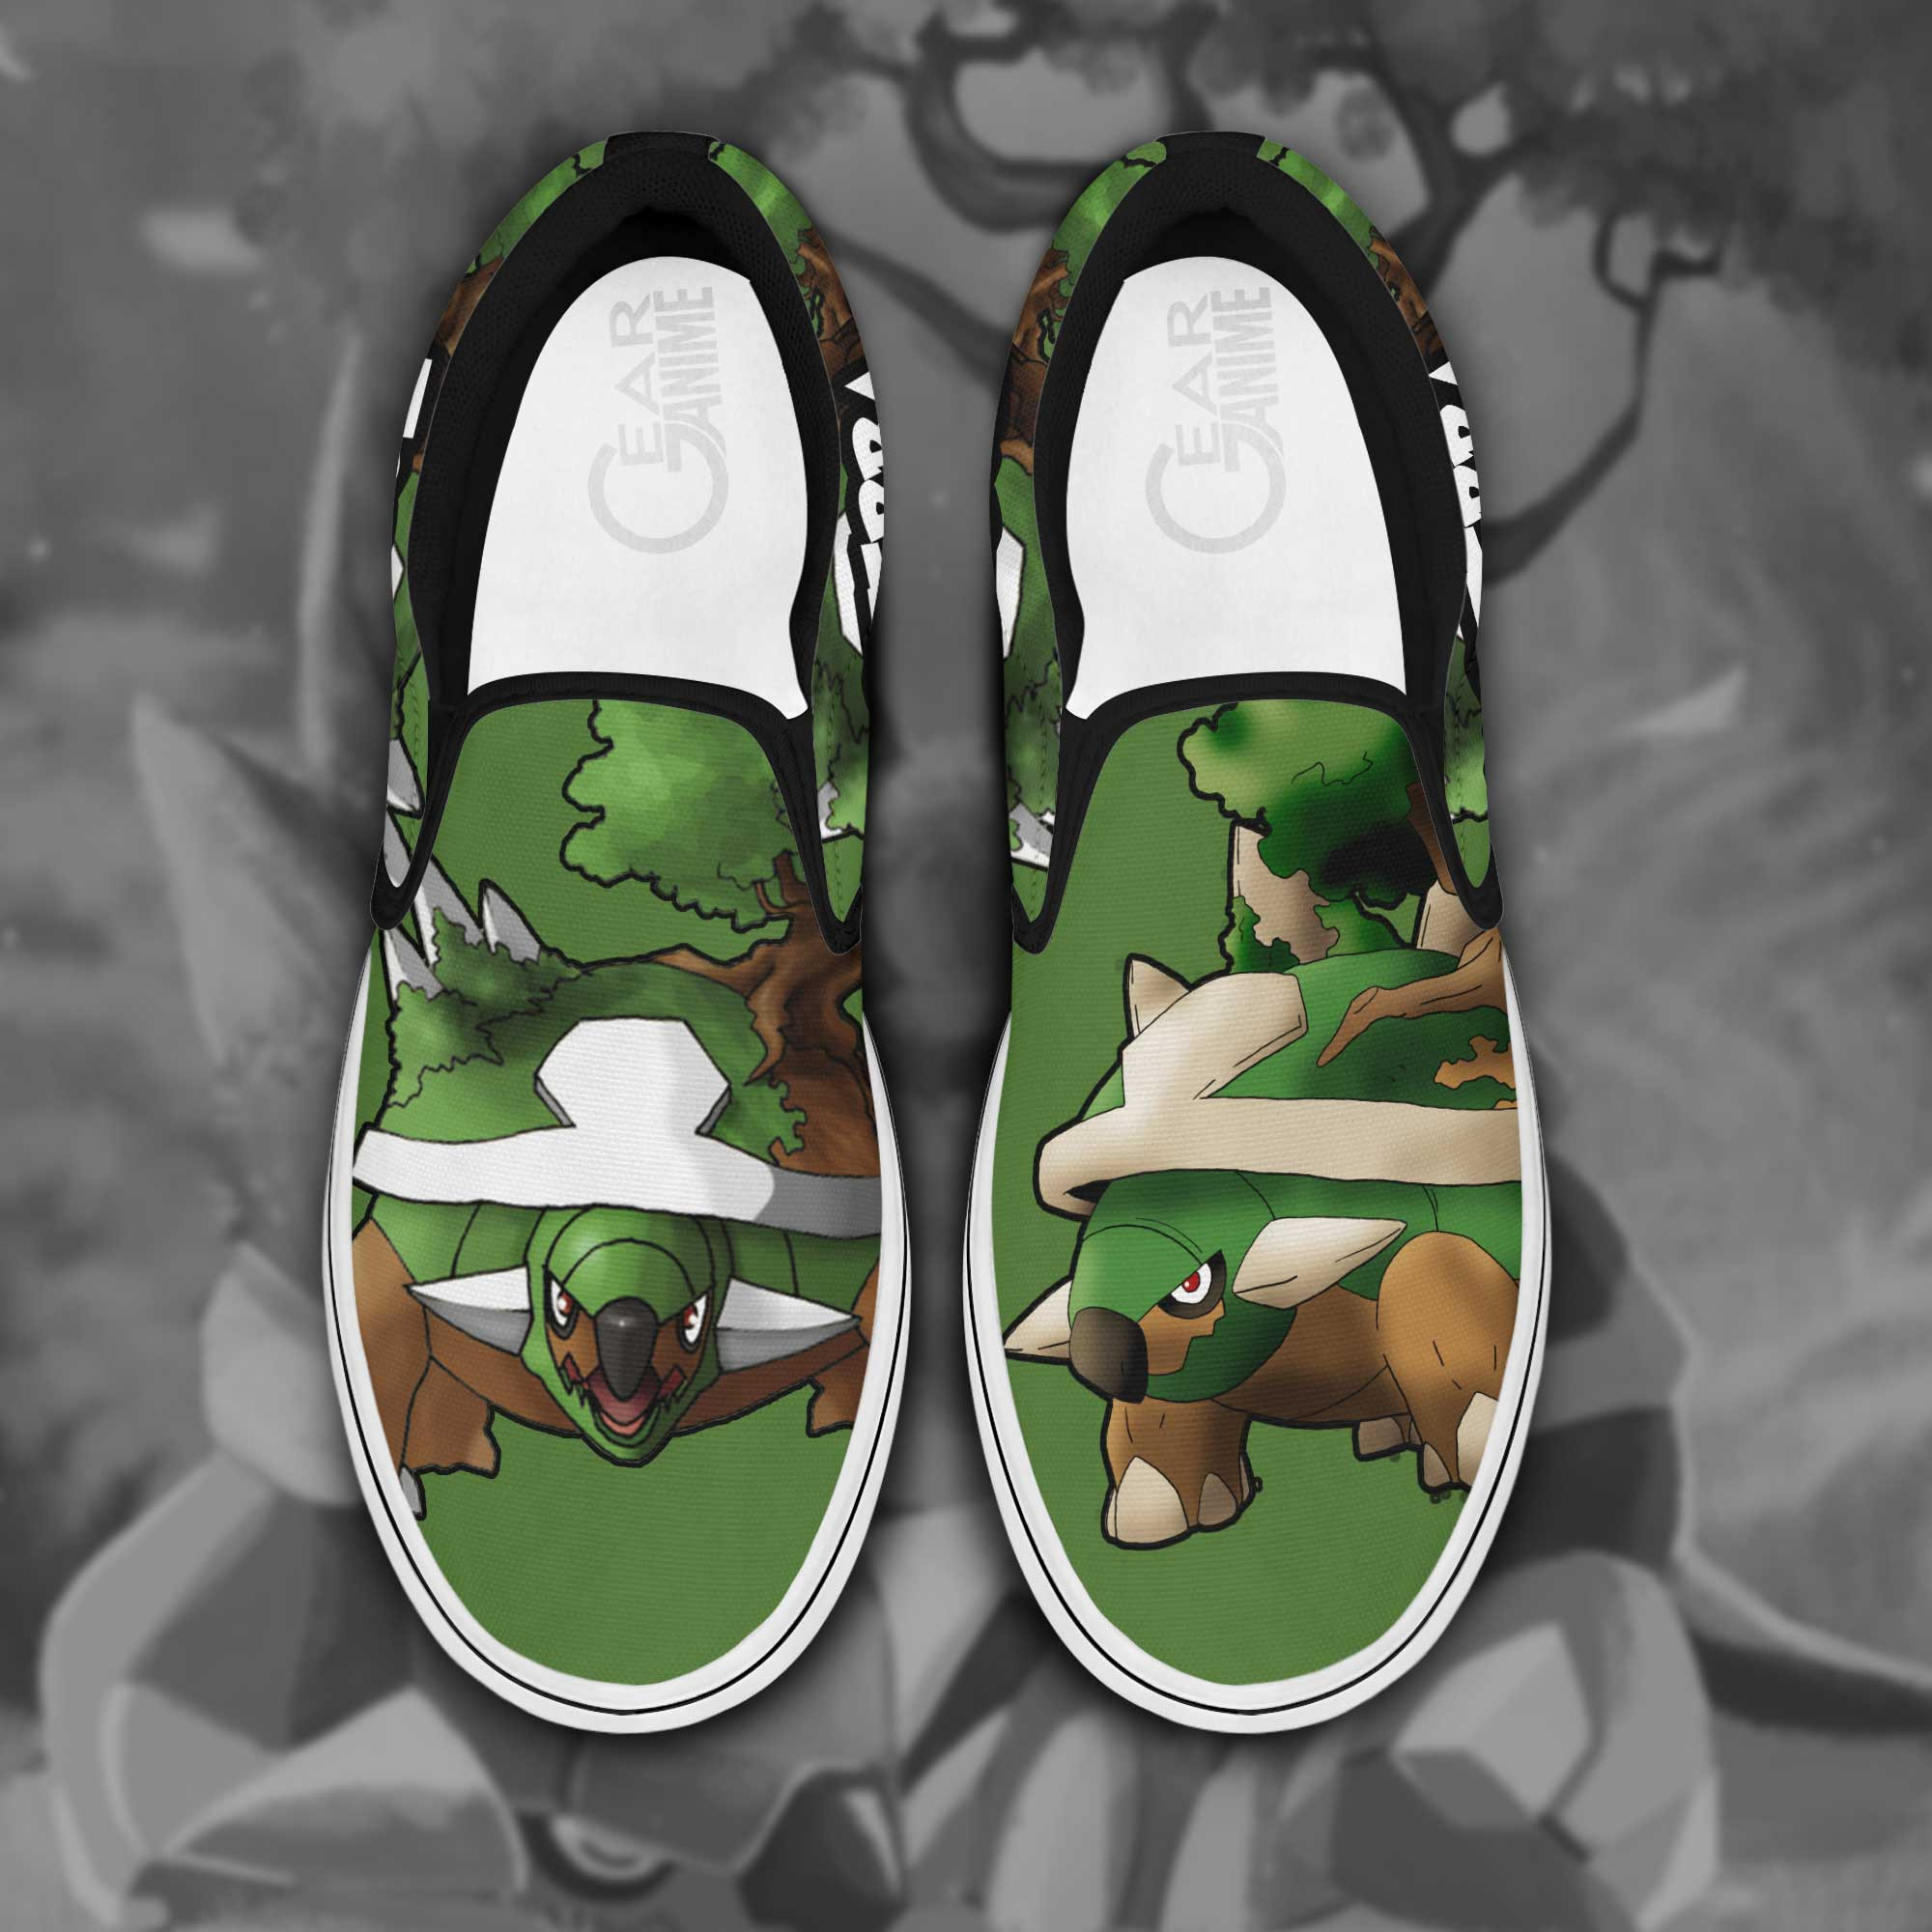 These Sneakers are a must-have for any Anime fan 190